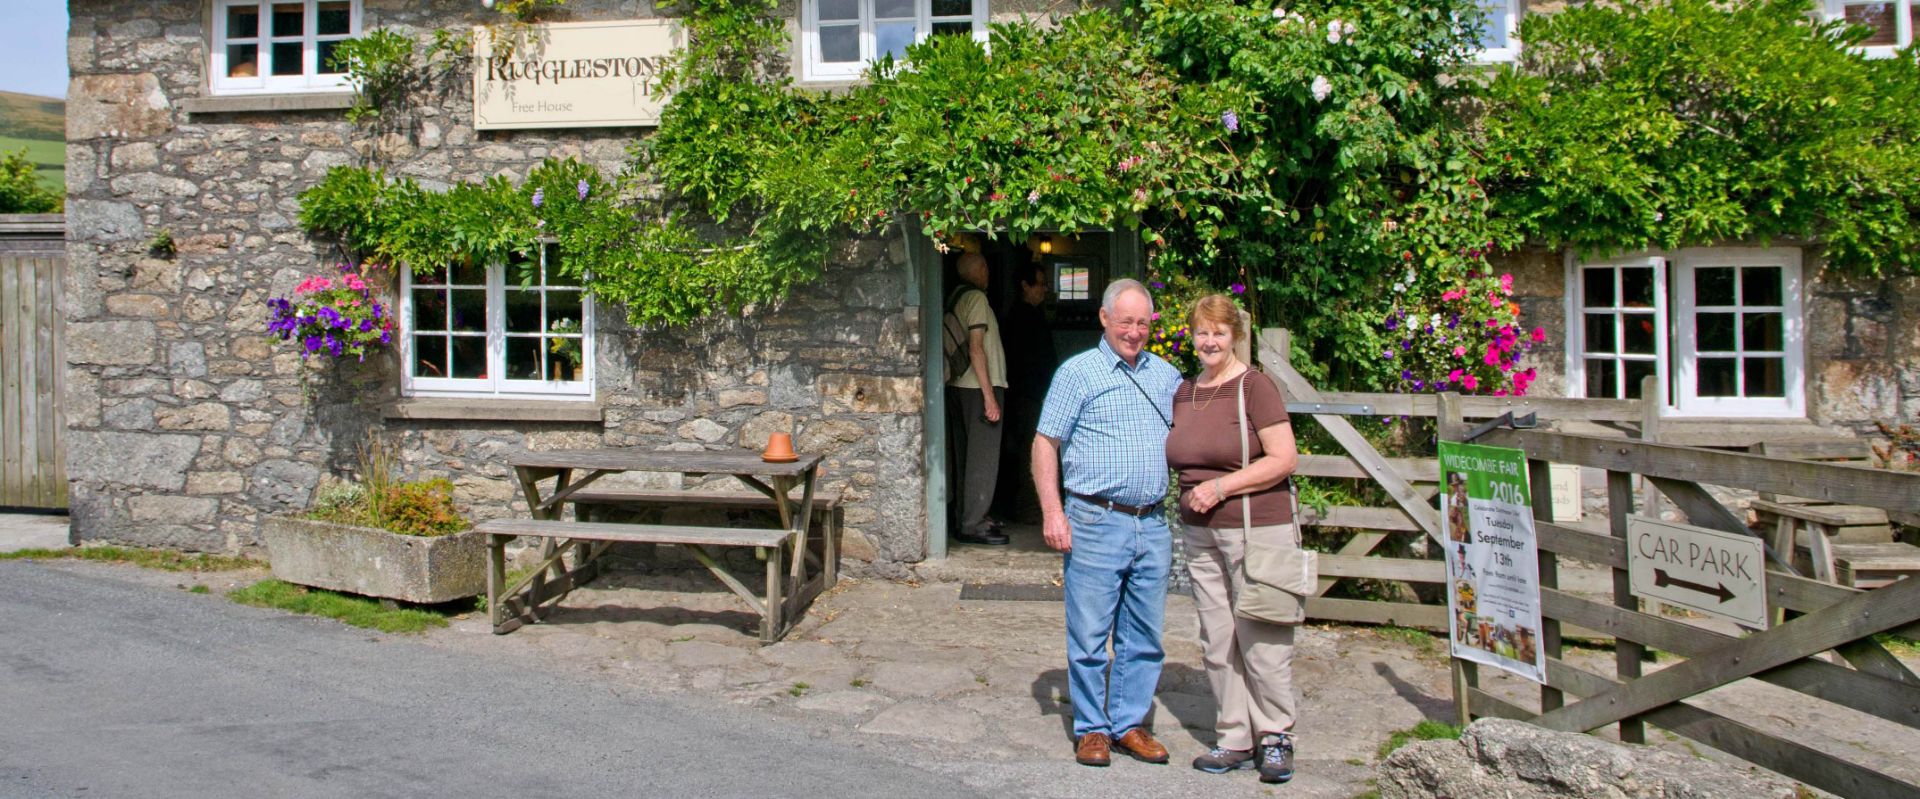 Guests outside The Rugglestone Inn at Widecombe